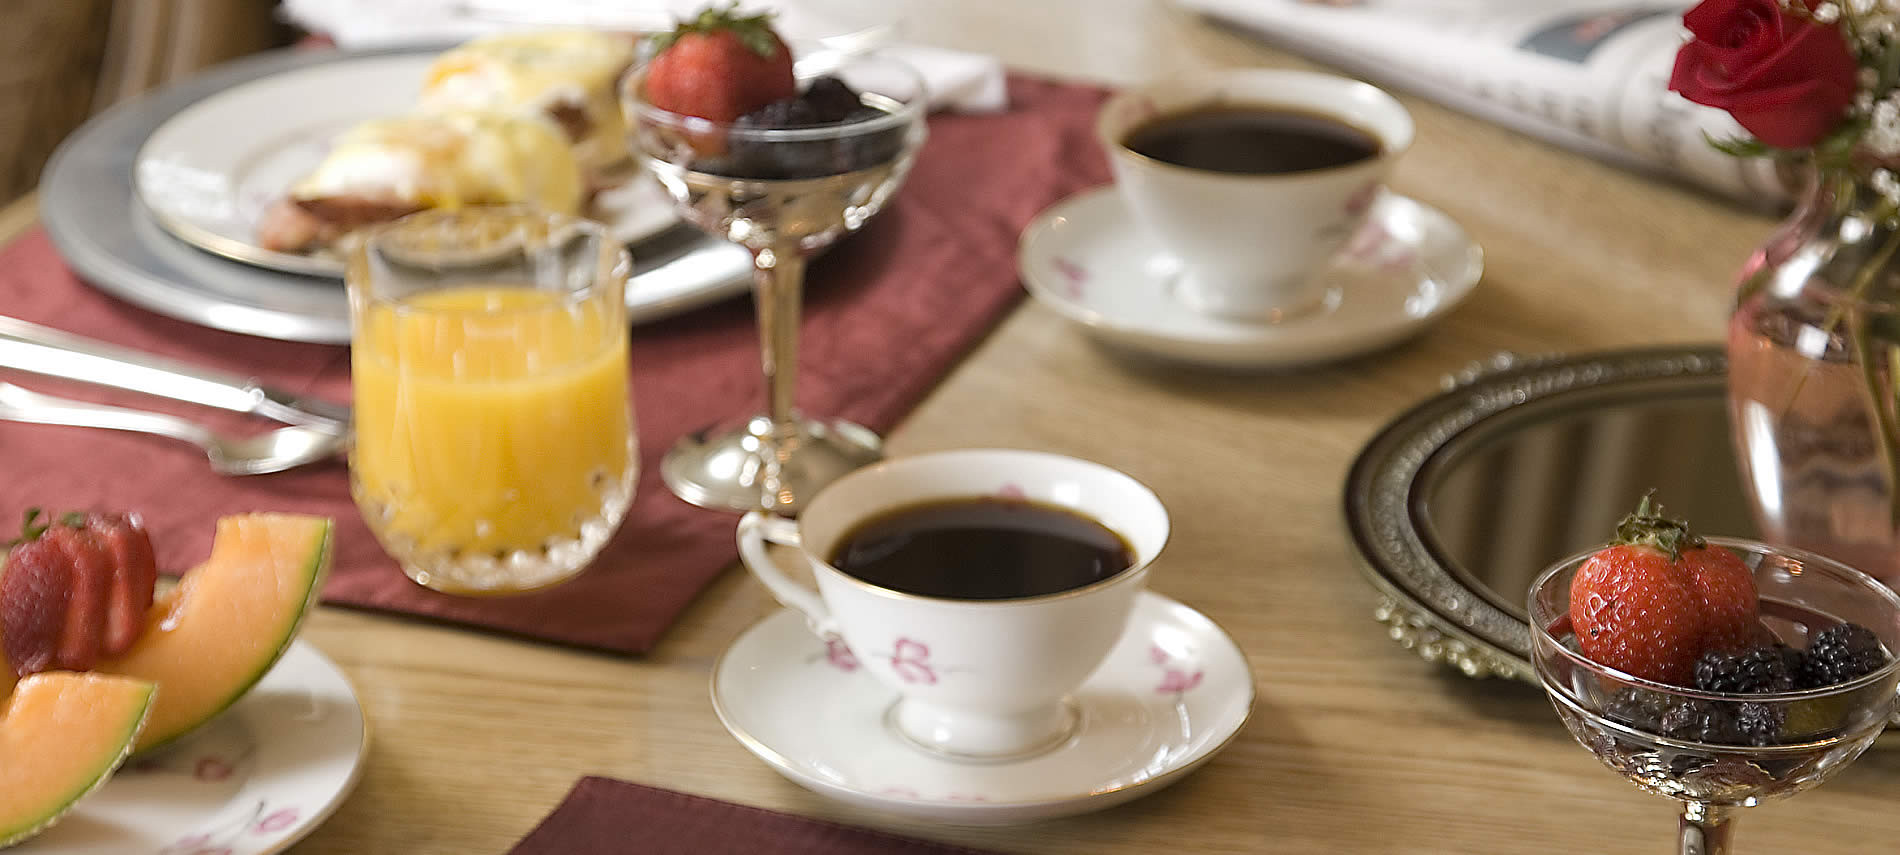 two coffee cups with saucer filled with coffee along side straberries in a glass and silver champagne glass on red placemat and glass of orange juice